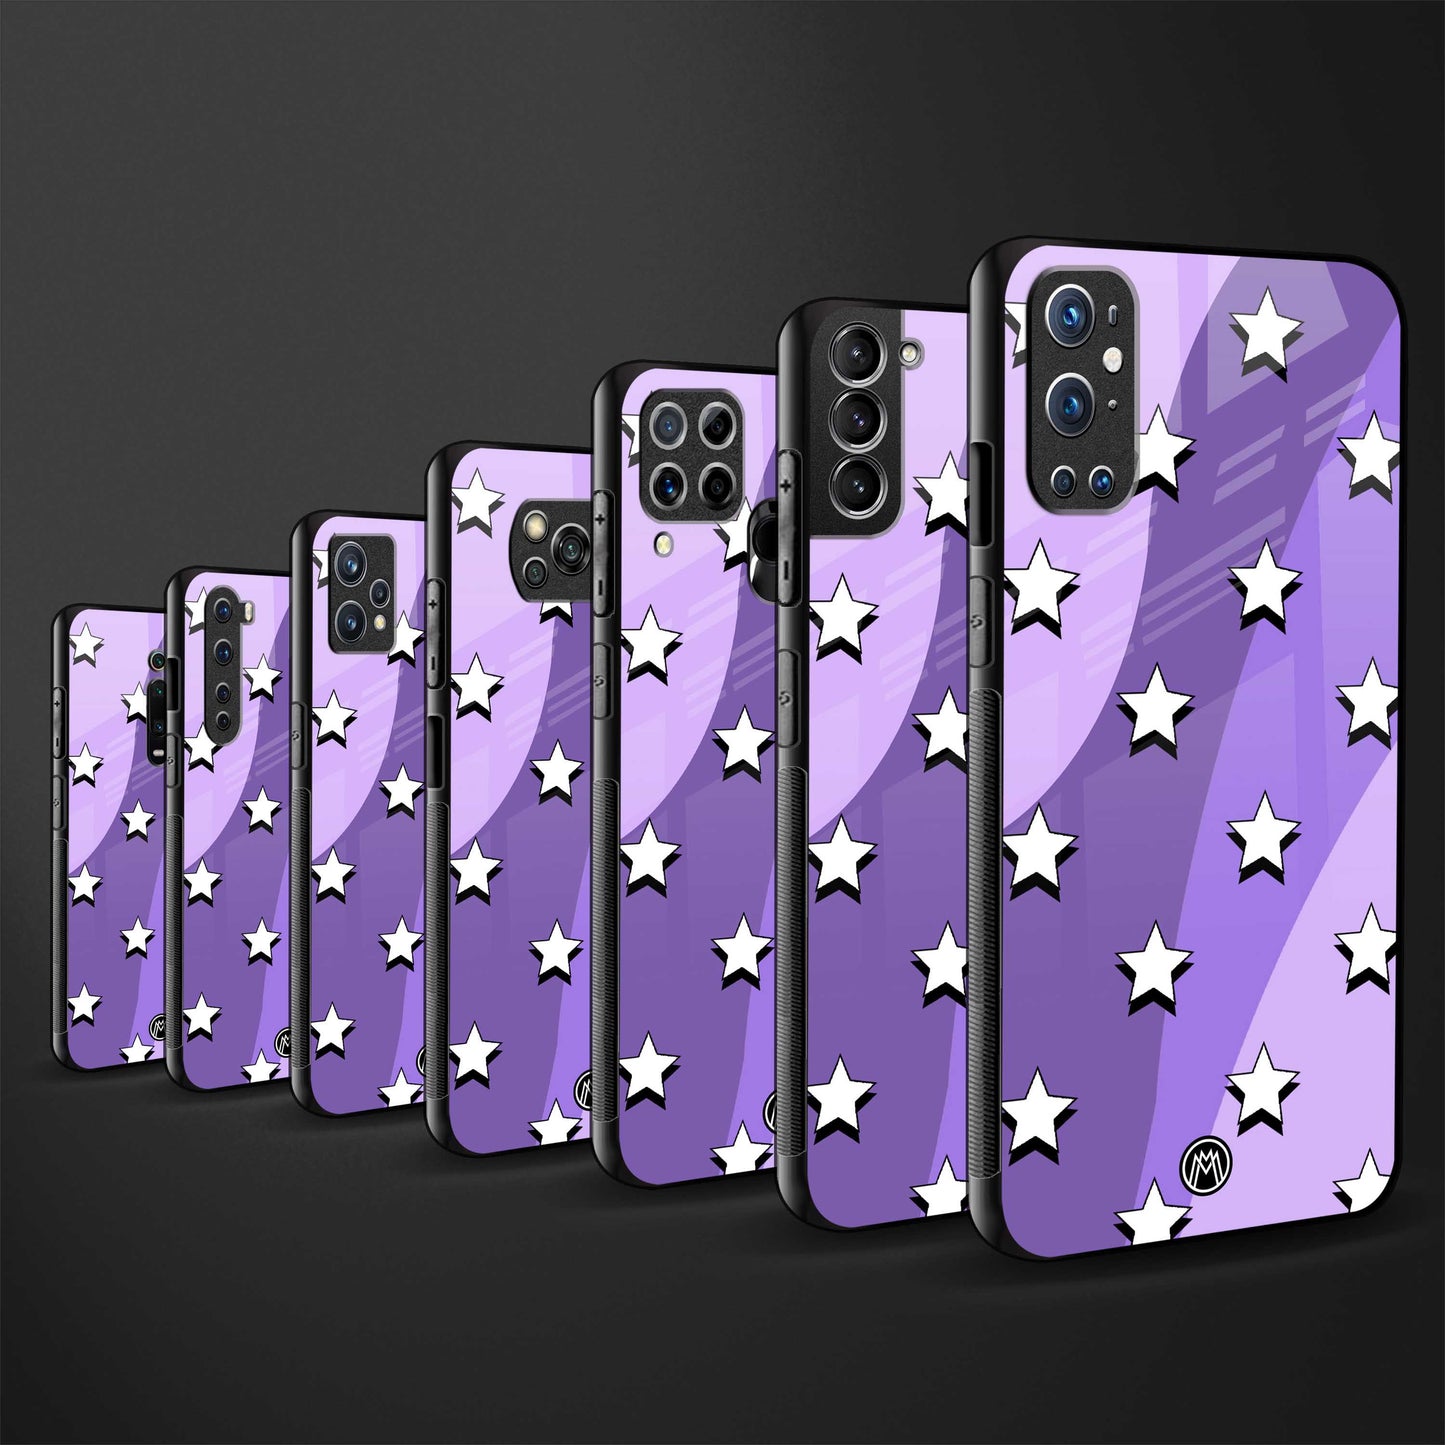 lost in paradise grape edition back phone cover | glass case for oppo reno 5